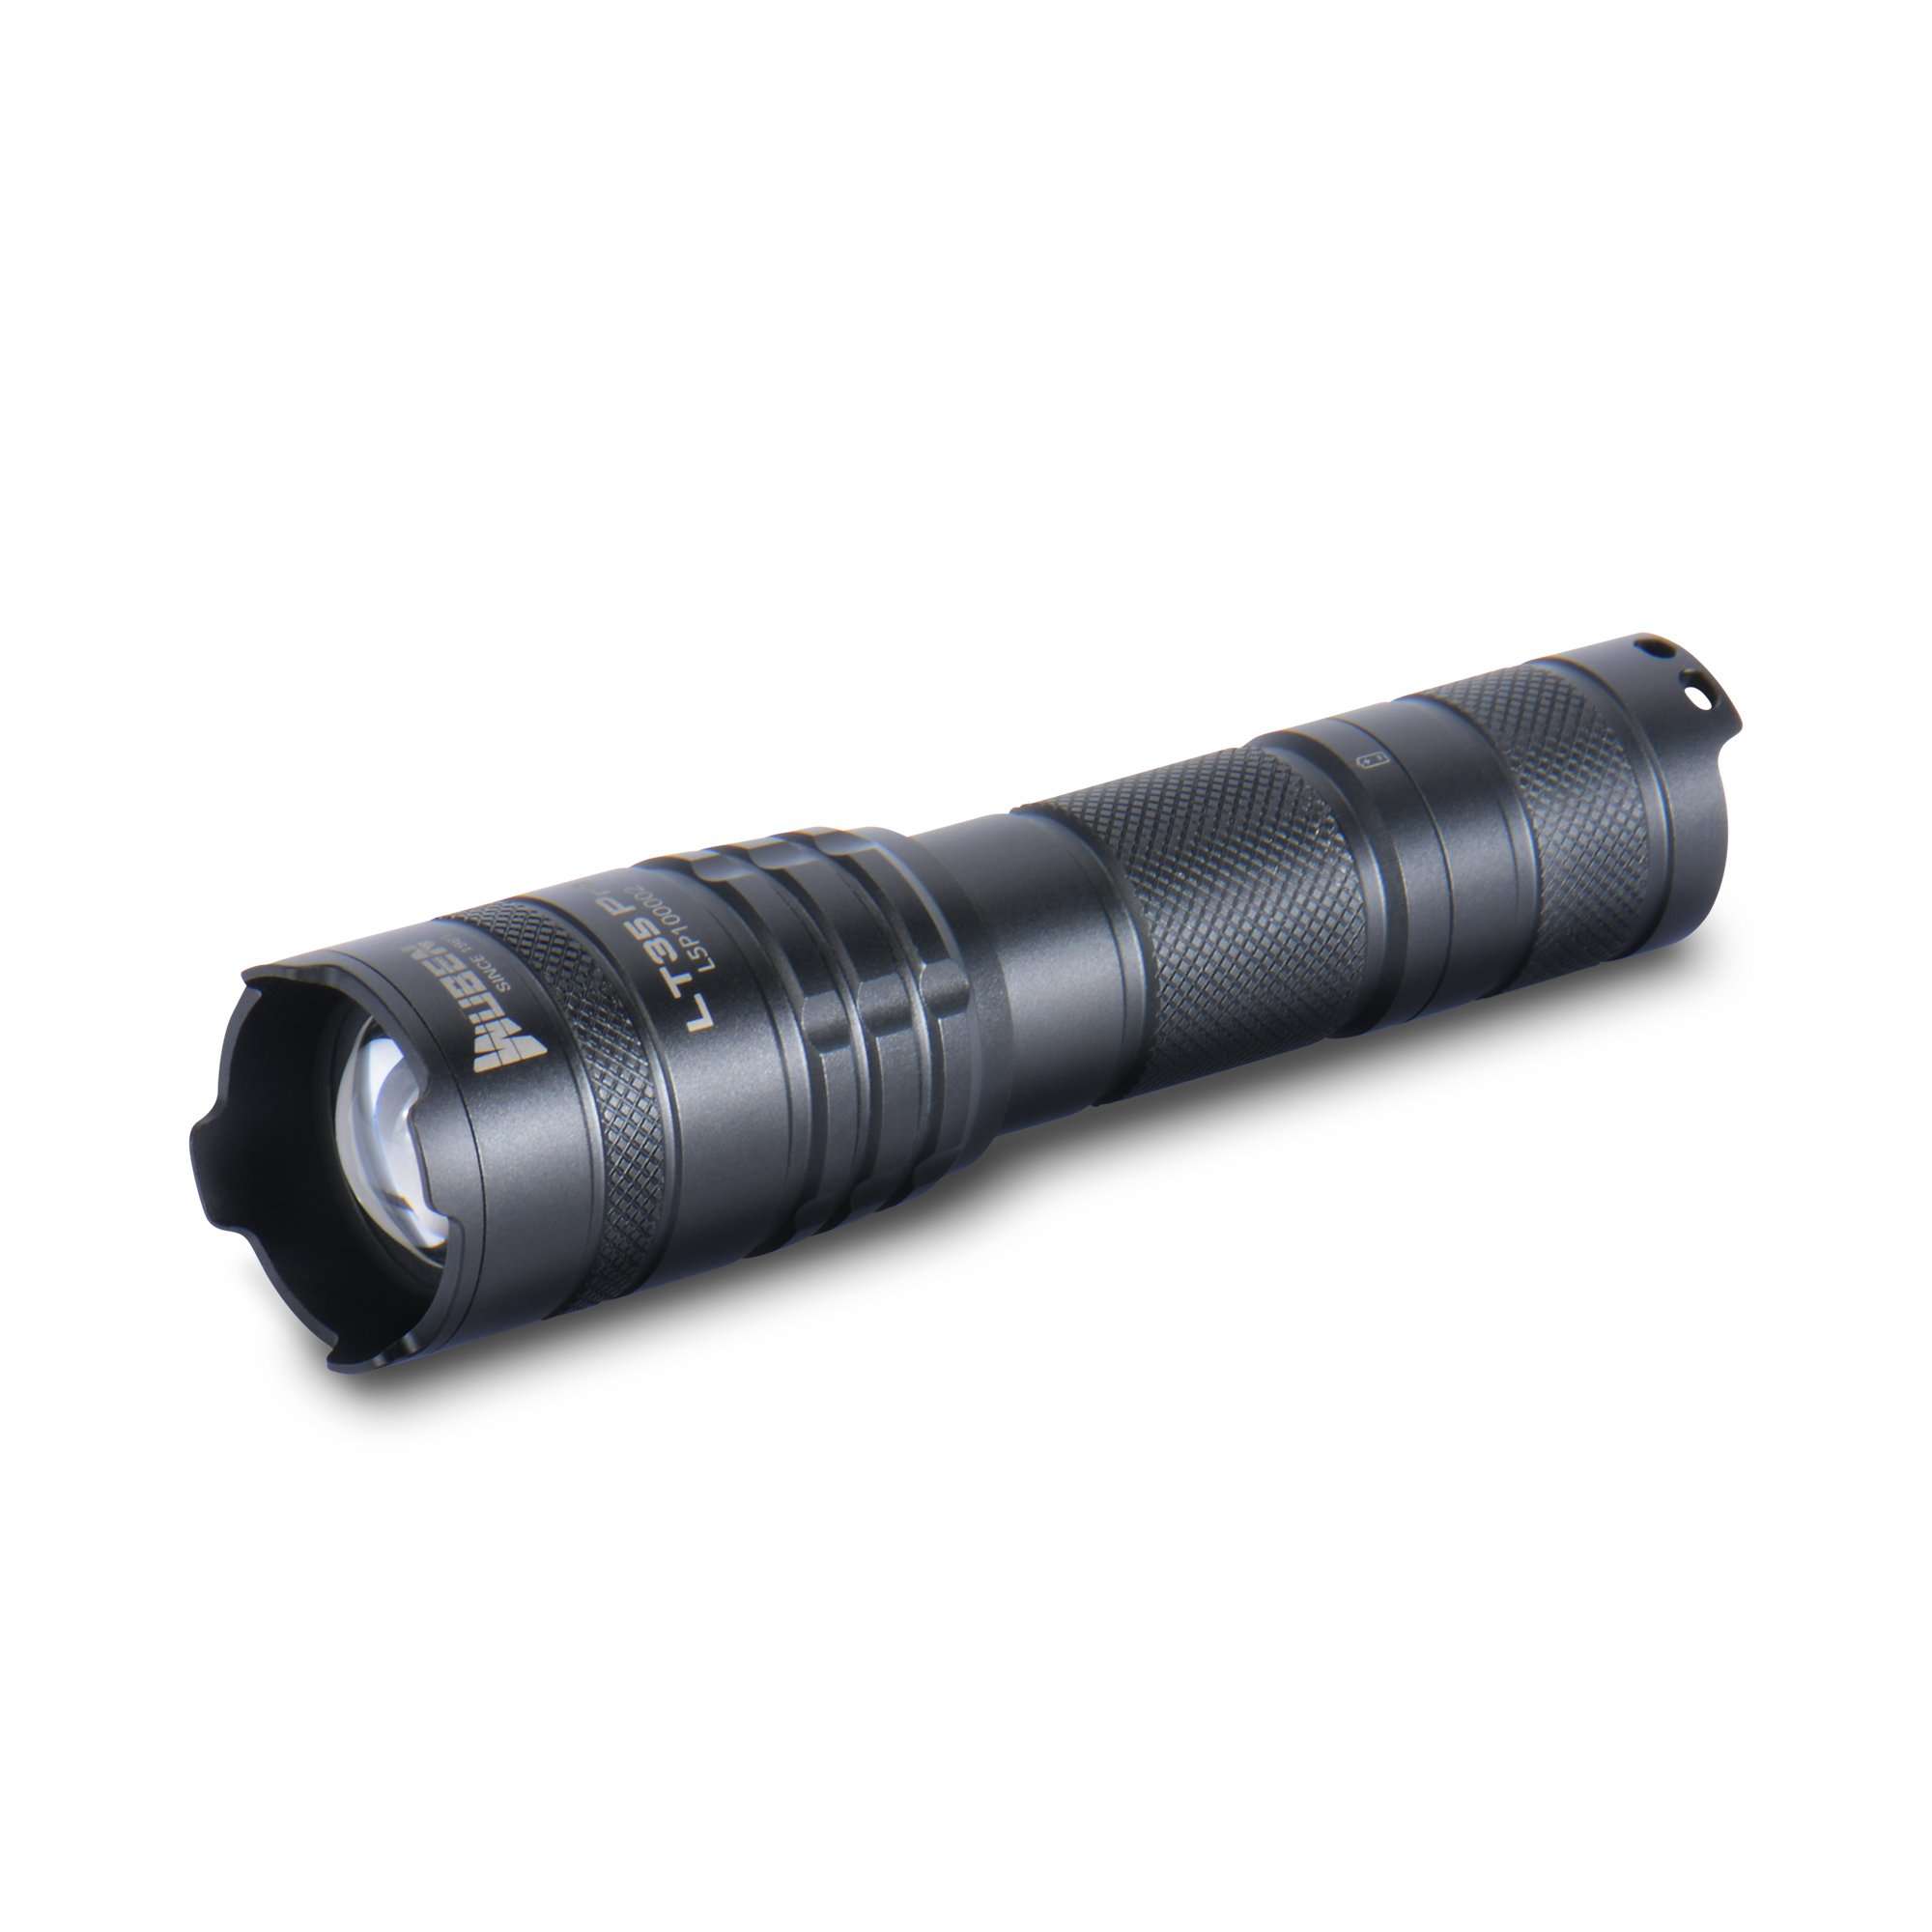 Wuben LT35 Pro Zoomable and Rechargeable 1200 Lumen Flashlight - 200 Metres